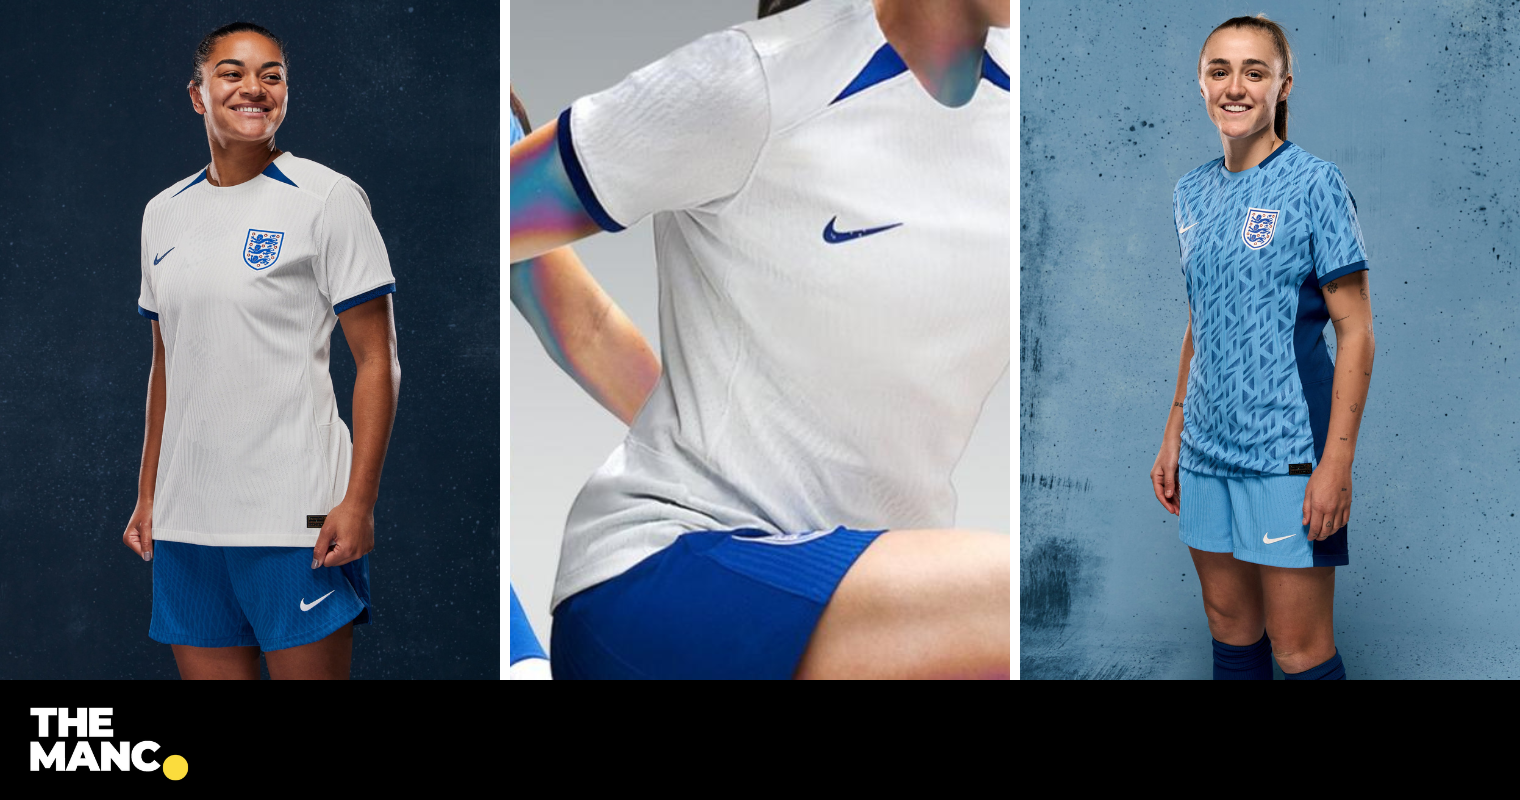 The Lionesses will wear blue shorts at the Women's World Cup to help combat period concerns